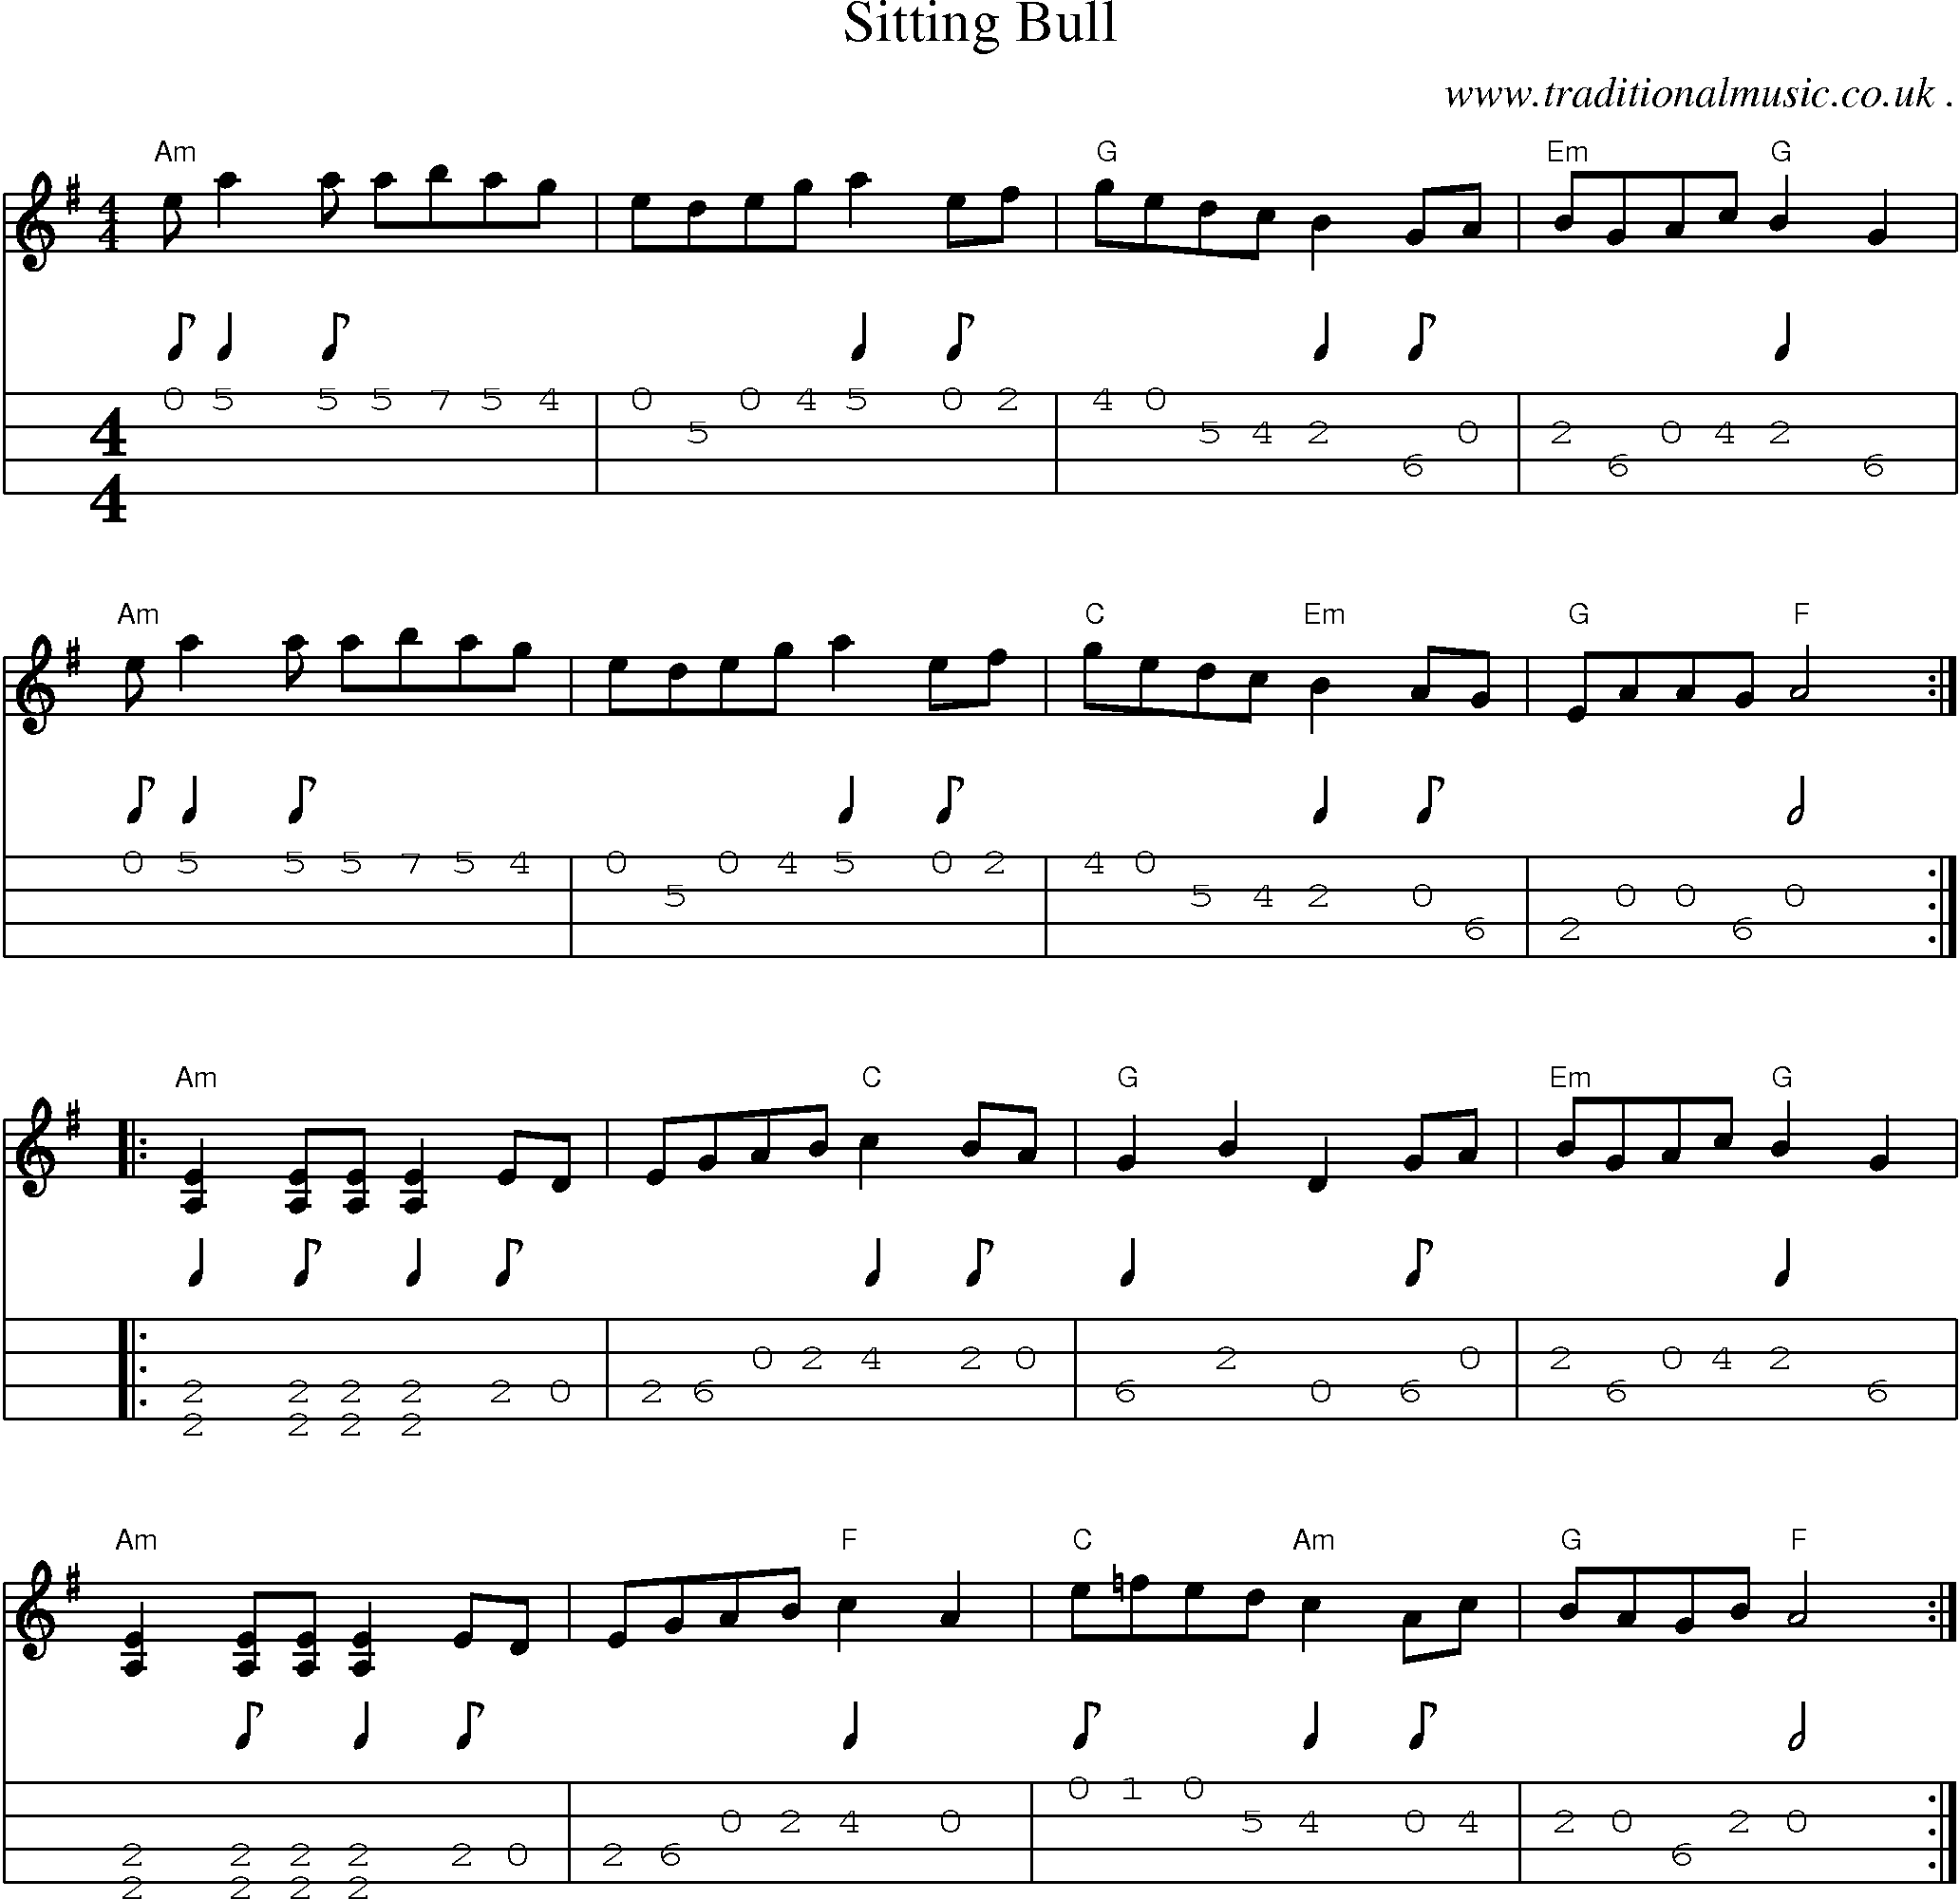 Music Score and Mandolin Tabs for Sitting Bull